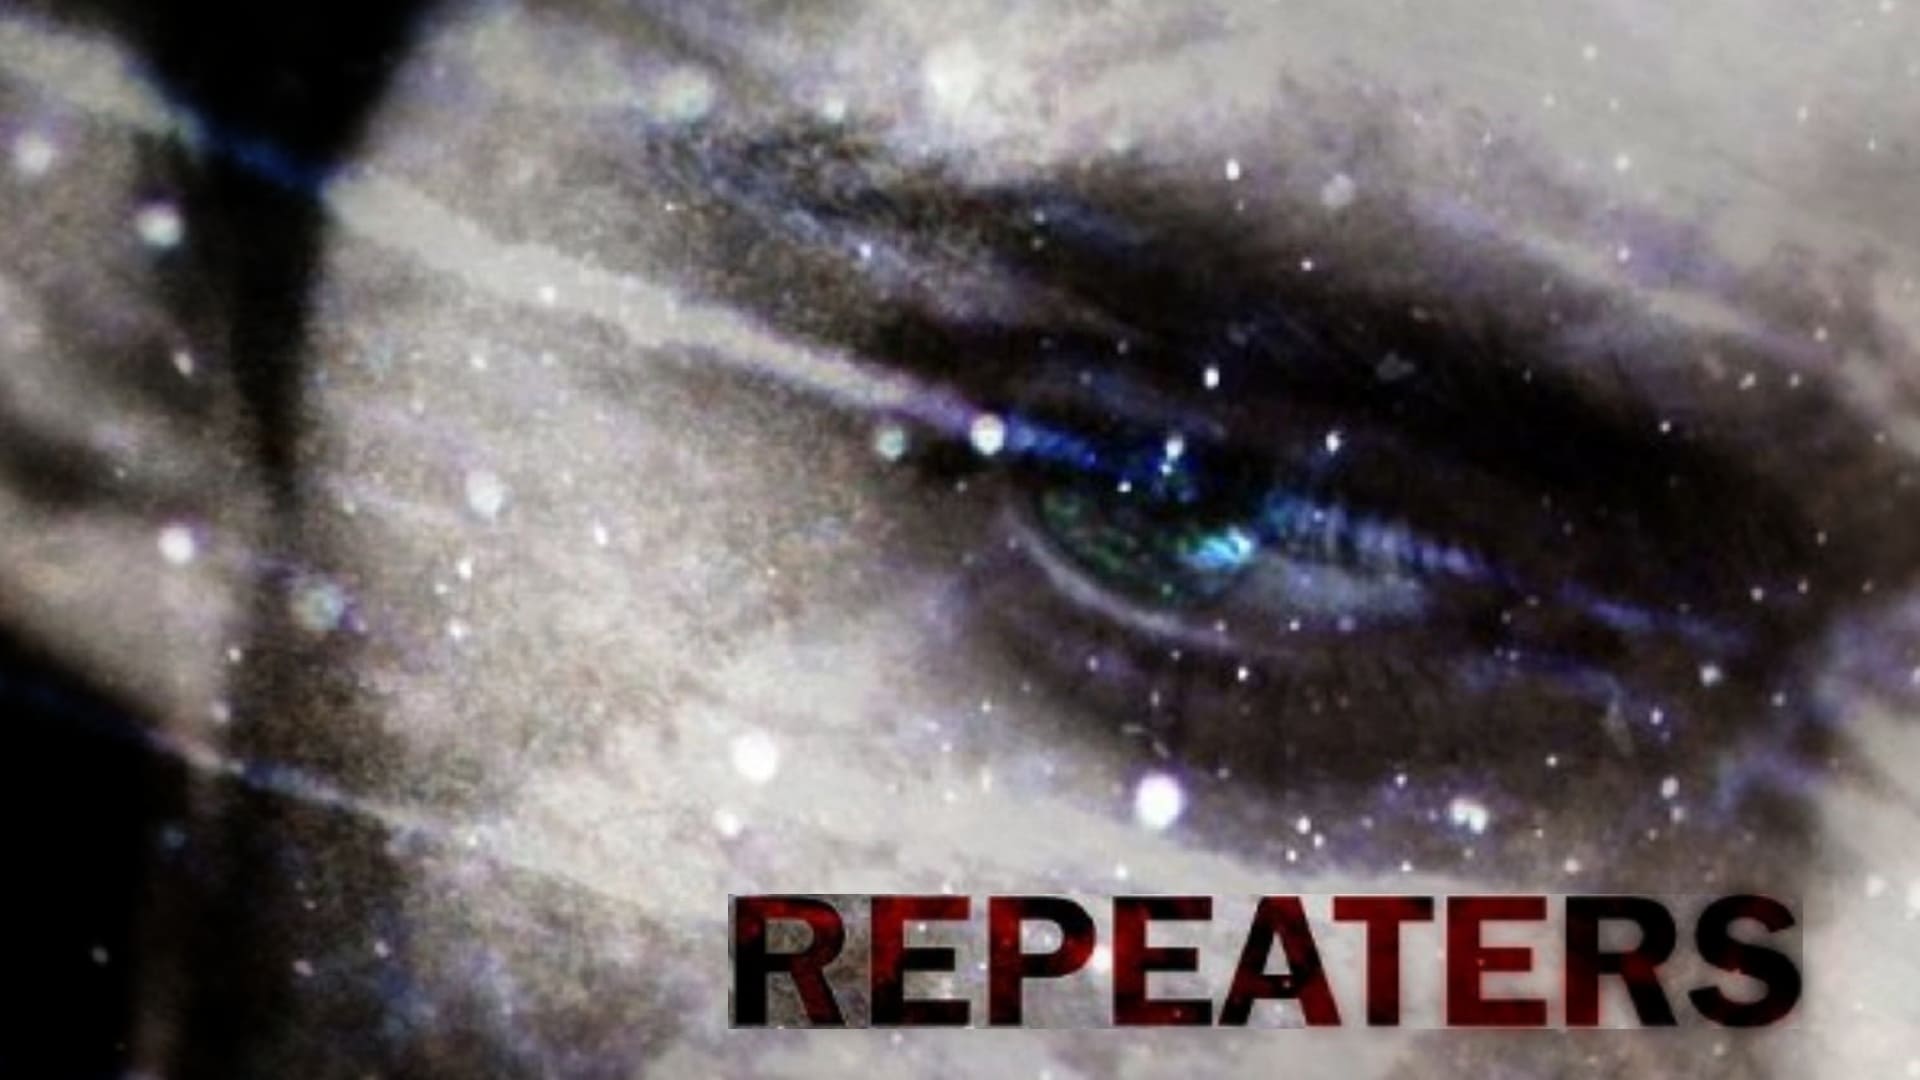 Repeaters (2011)